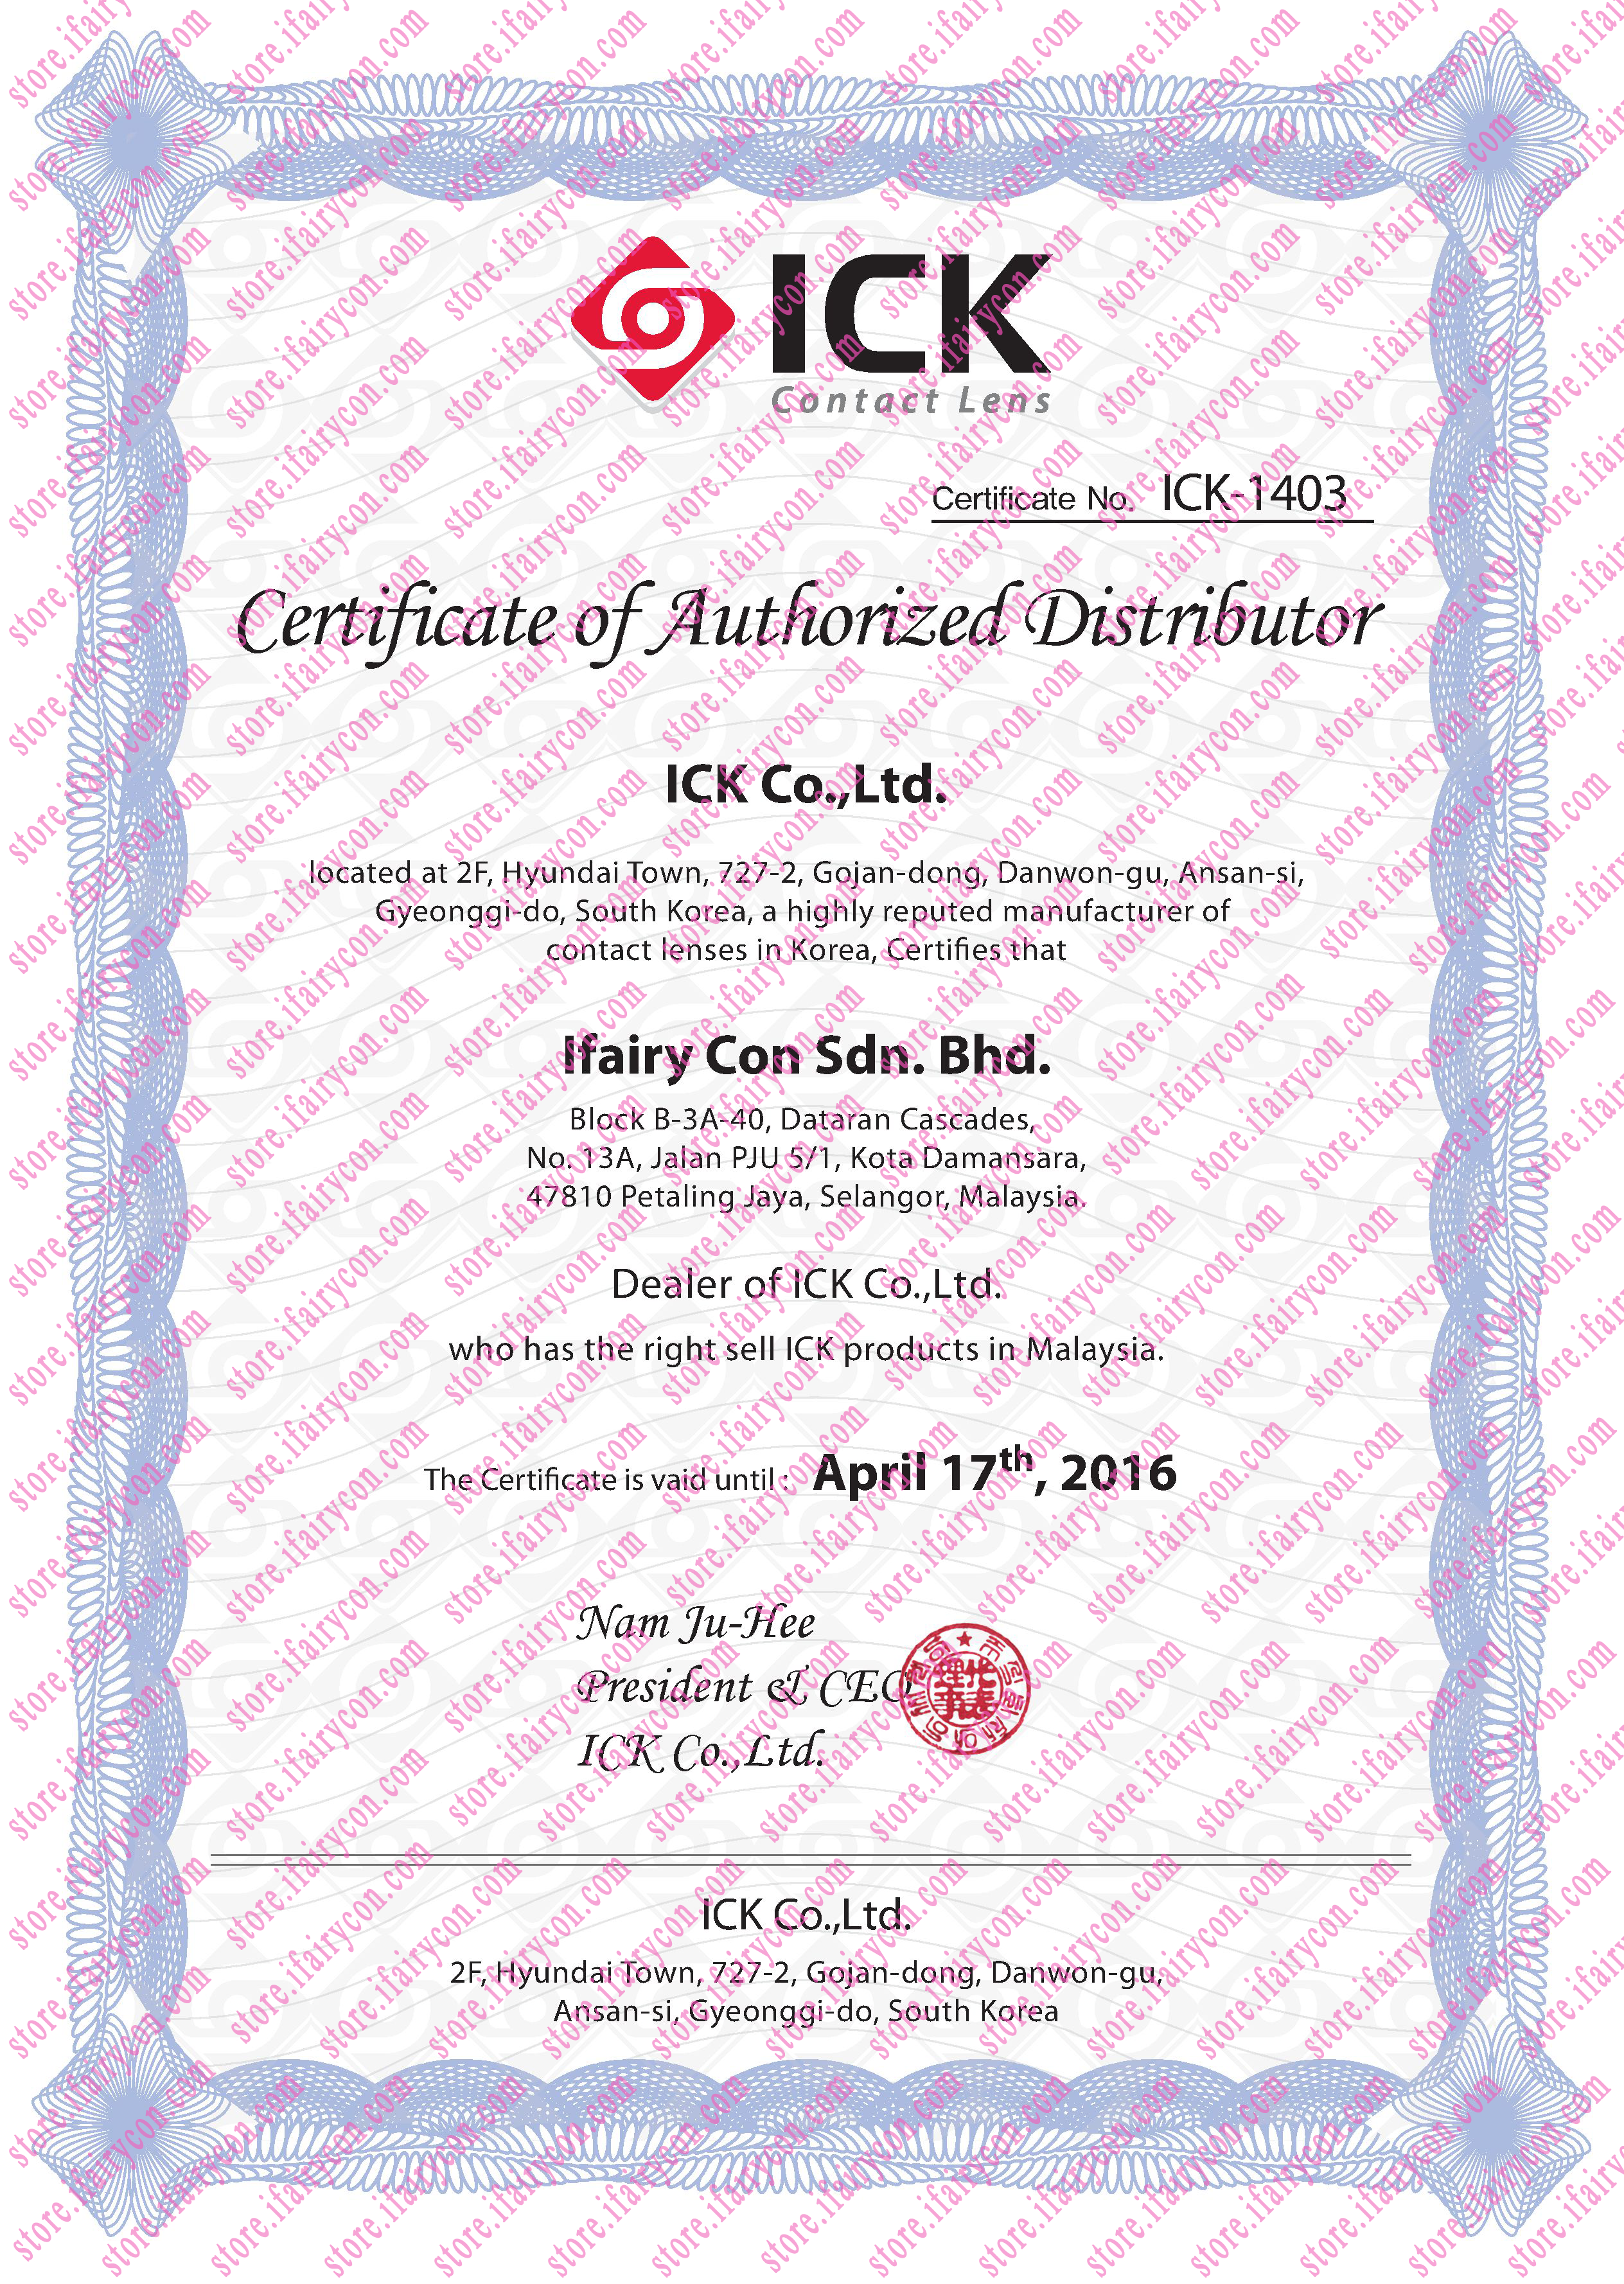 ick-certificate-done.png